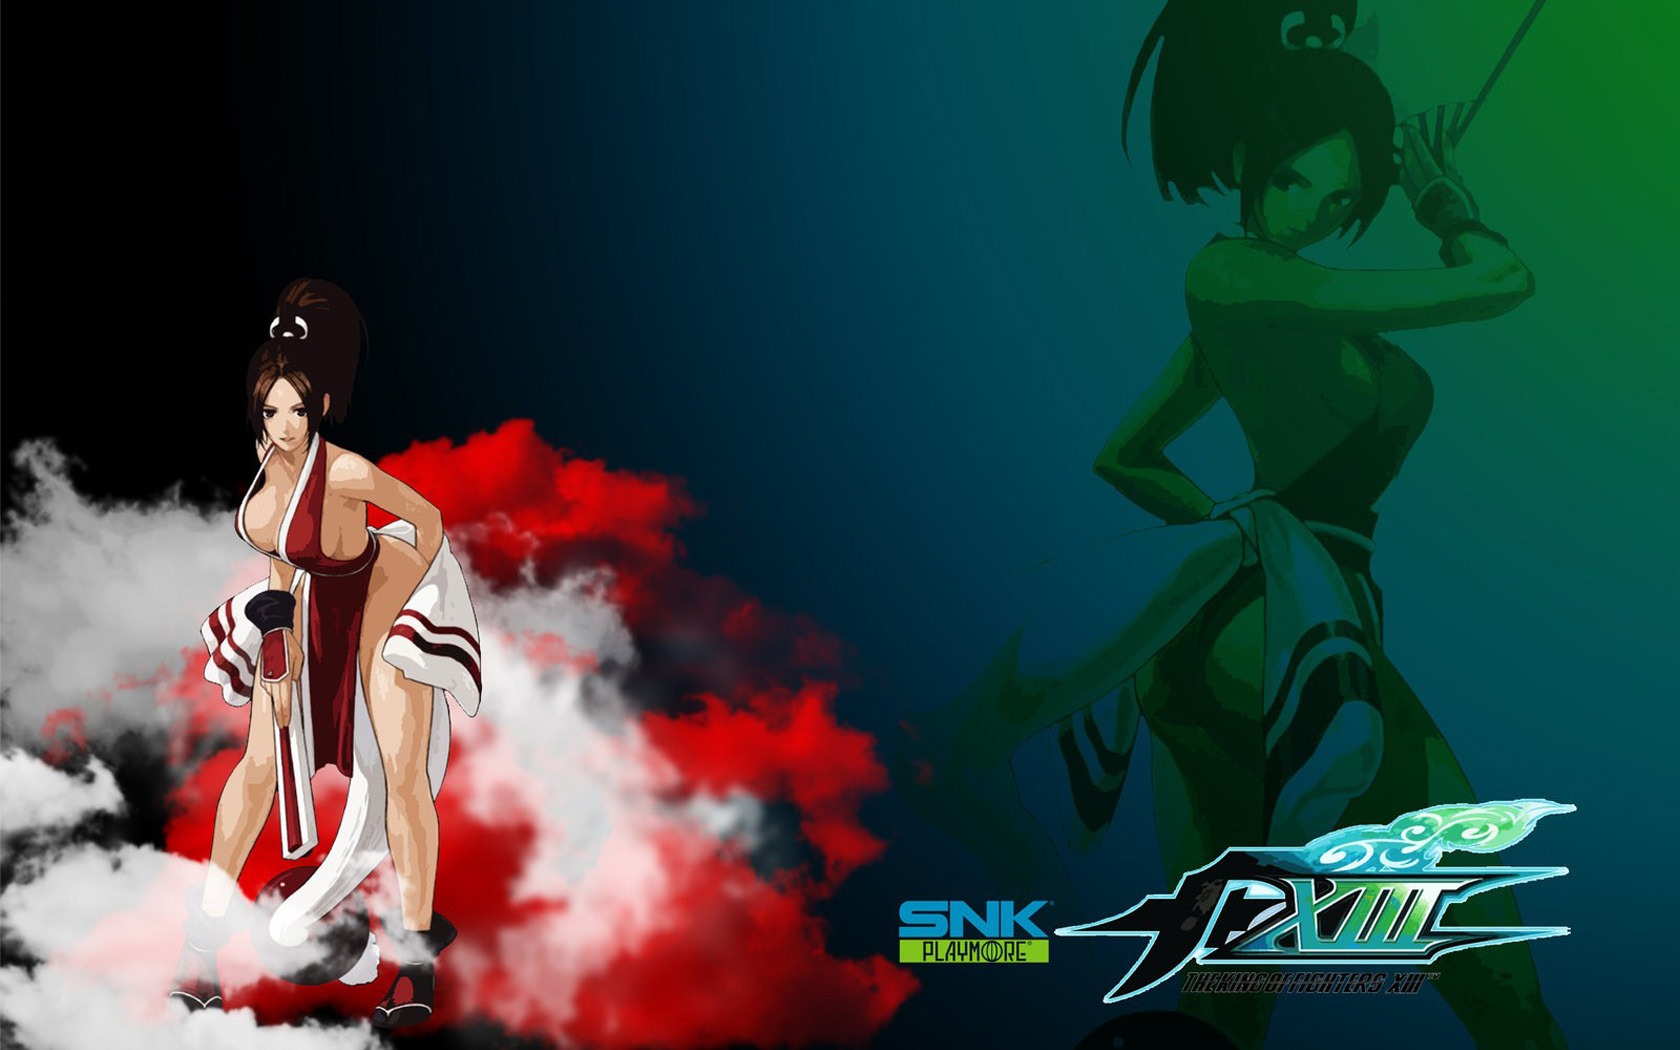 Le roi de wallpapers Fighters XIII #16 - 1680x1050